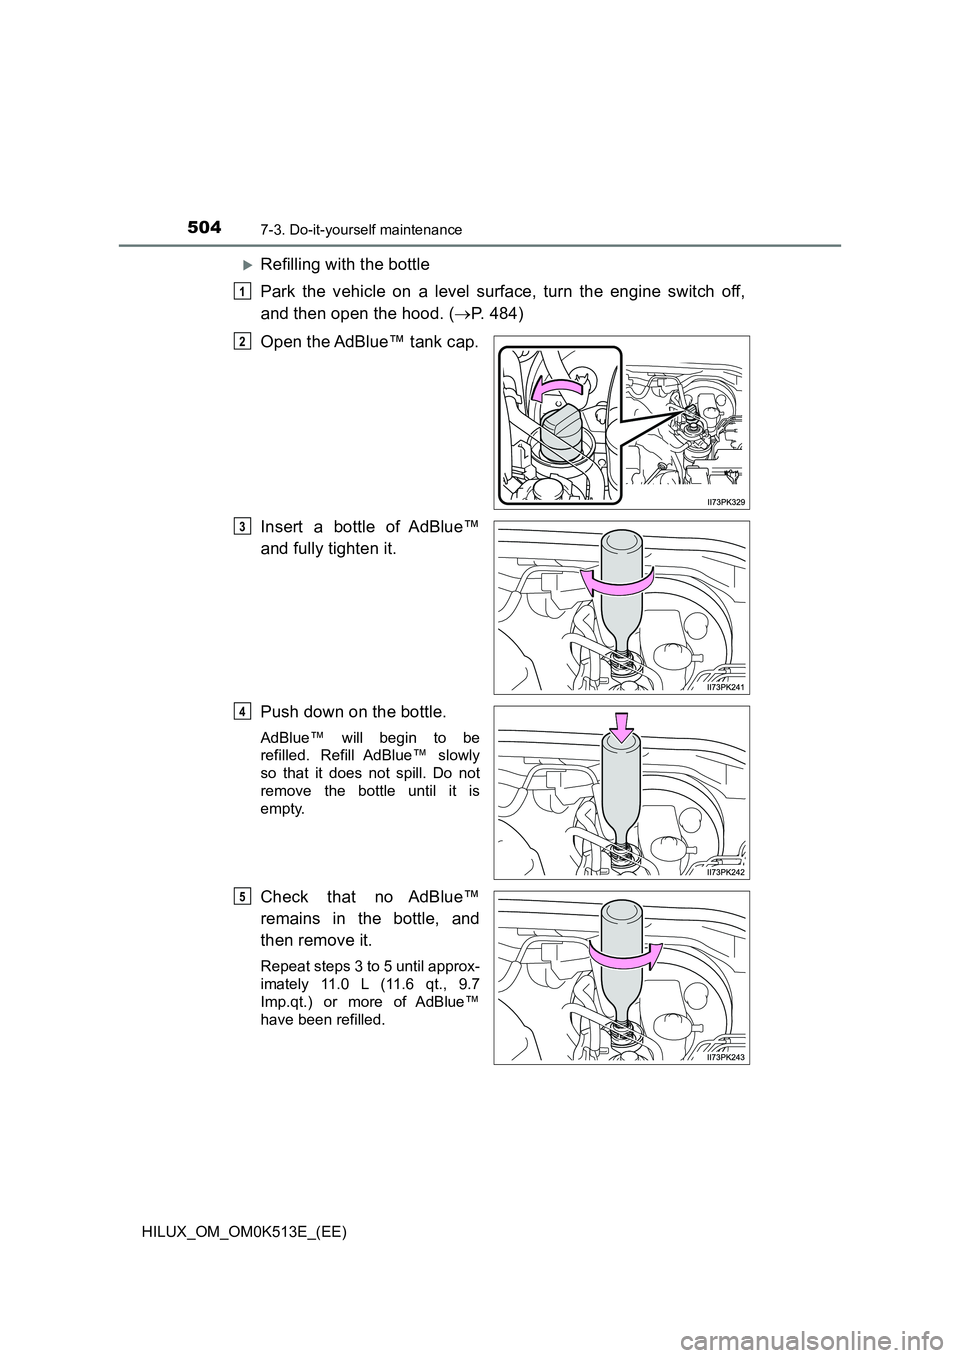 TOYOTA HILUX 2022  Owners Manual 5047-3. Do-it-yourself maintenance
HILUX_OM_OM0K513E_(EE)
Refilling with the bottle 
Park the vehicle on a level surface, turn the engine switch off, 
and then open the hood. ( P. 484) 
Open the